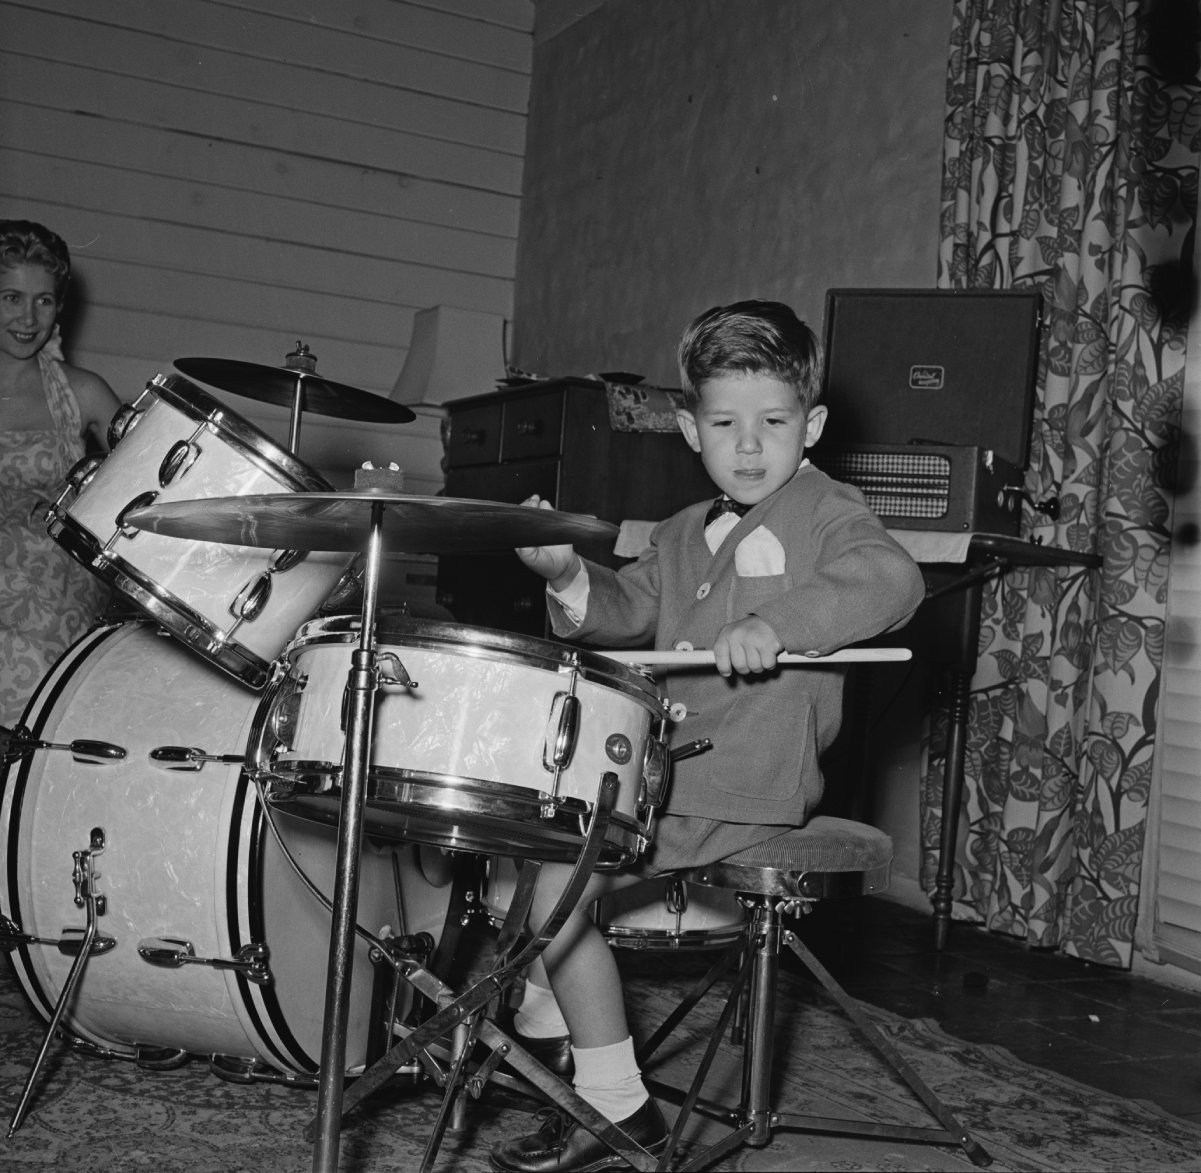 Keith Thibodeaux on the drums